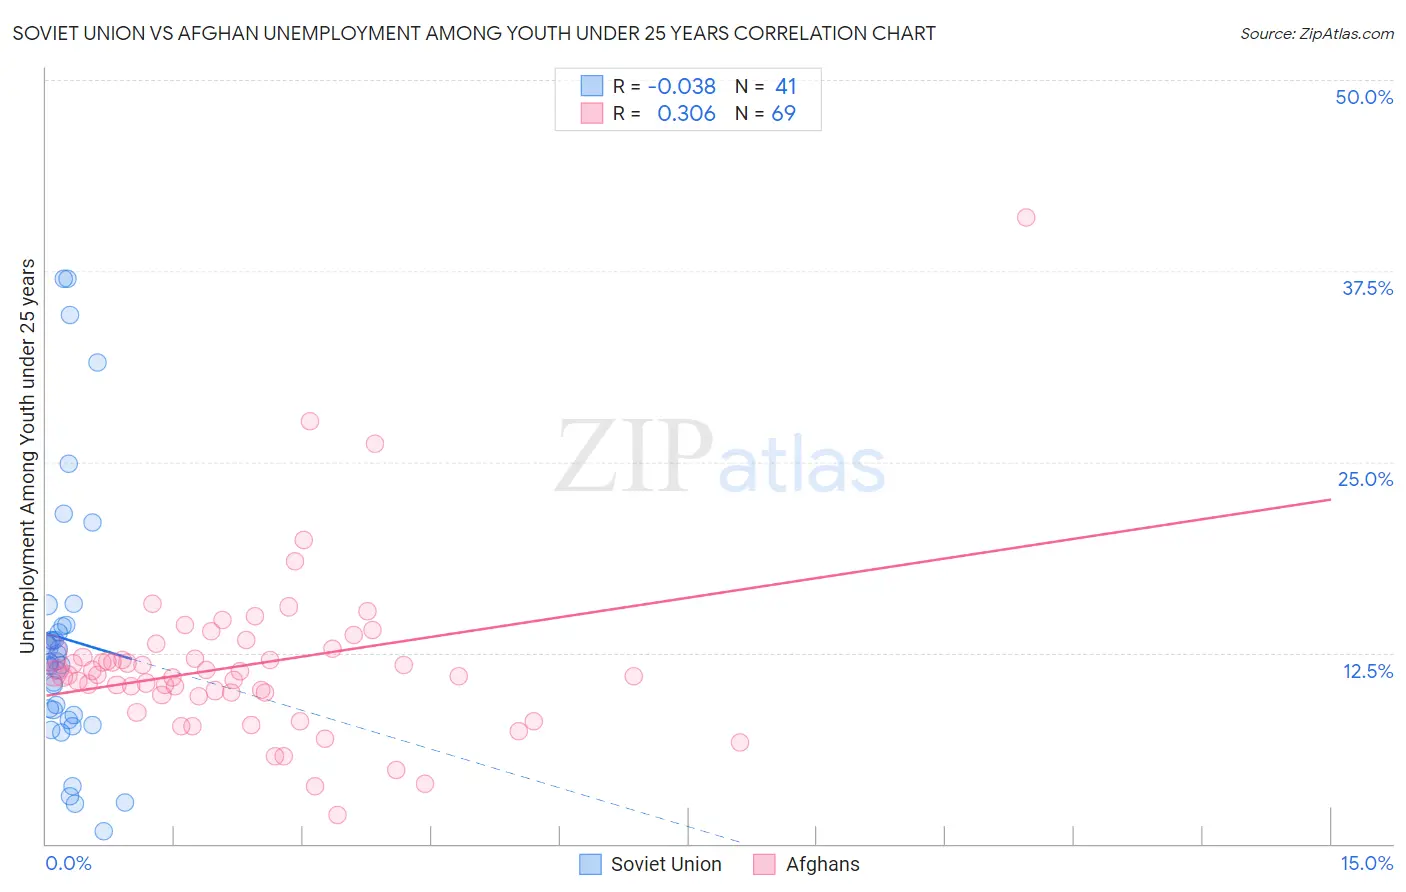 Soviet Union vs Afghan Unemployment Among Youth under 25 years